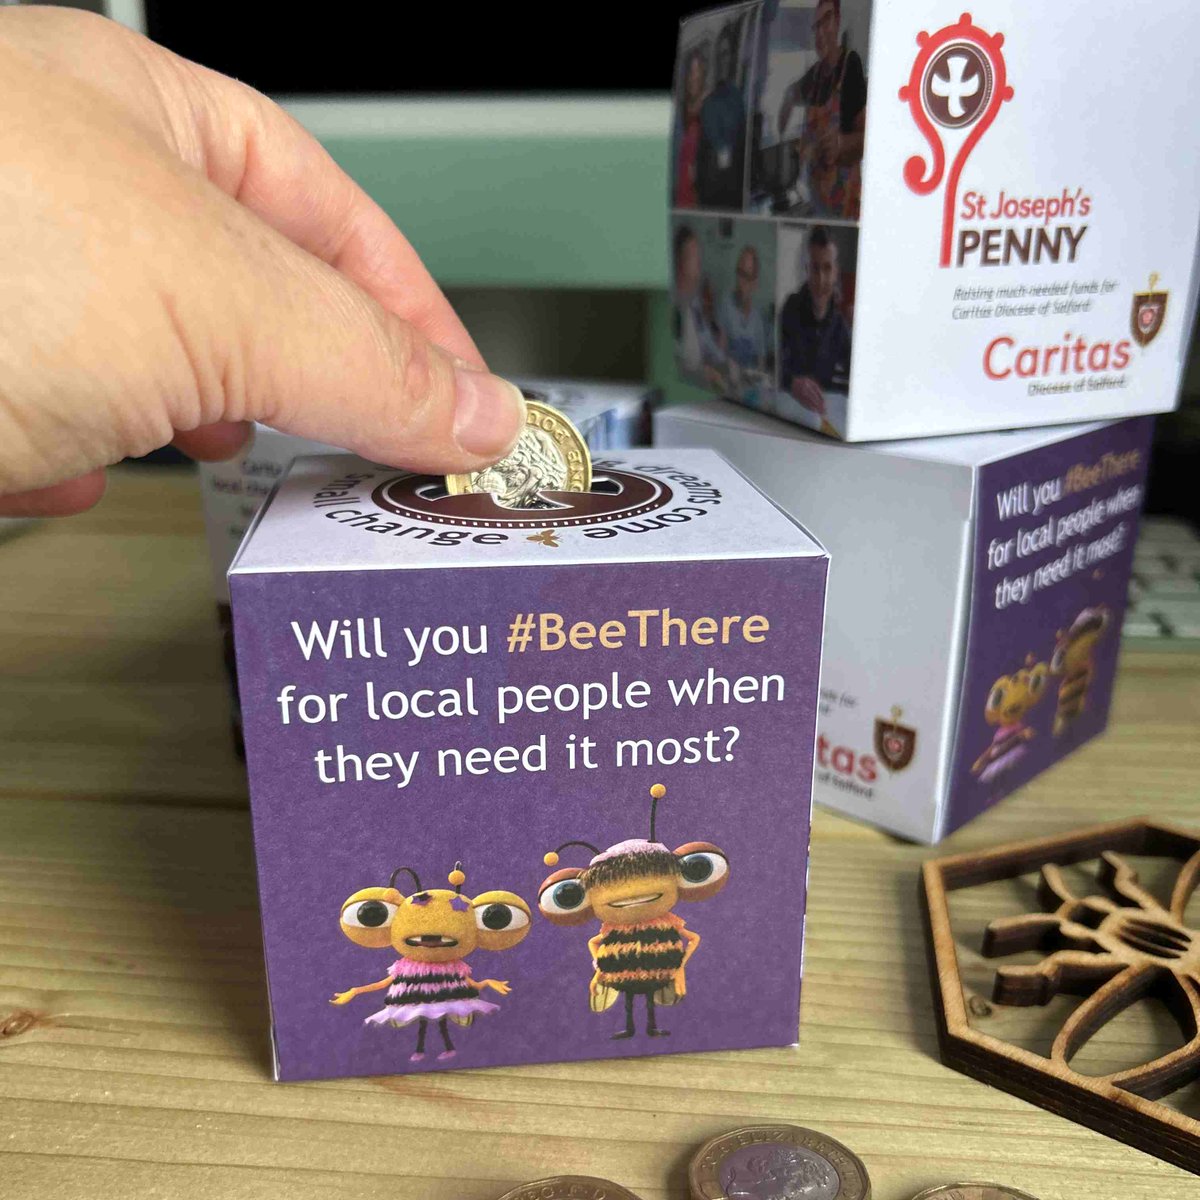 Calling schools in Greater Manchester and Lancashire! Free St Joseph's Penny boxes for this year are now available to order - place yours now here: caritassalford.org.uk/campaign/st-jo…